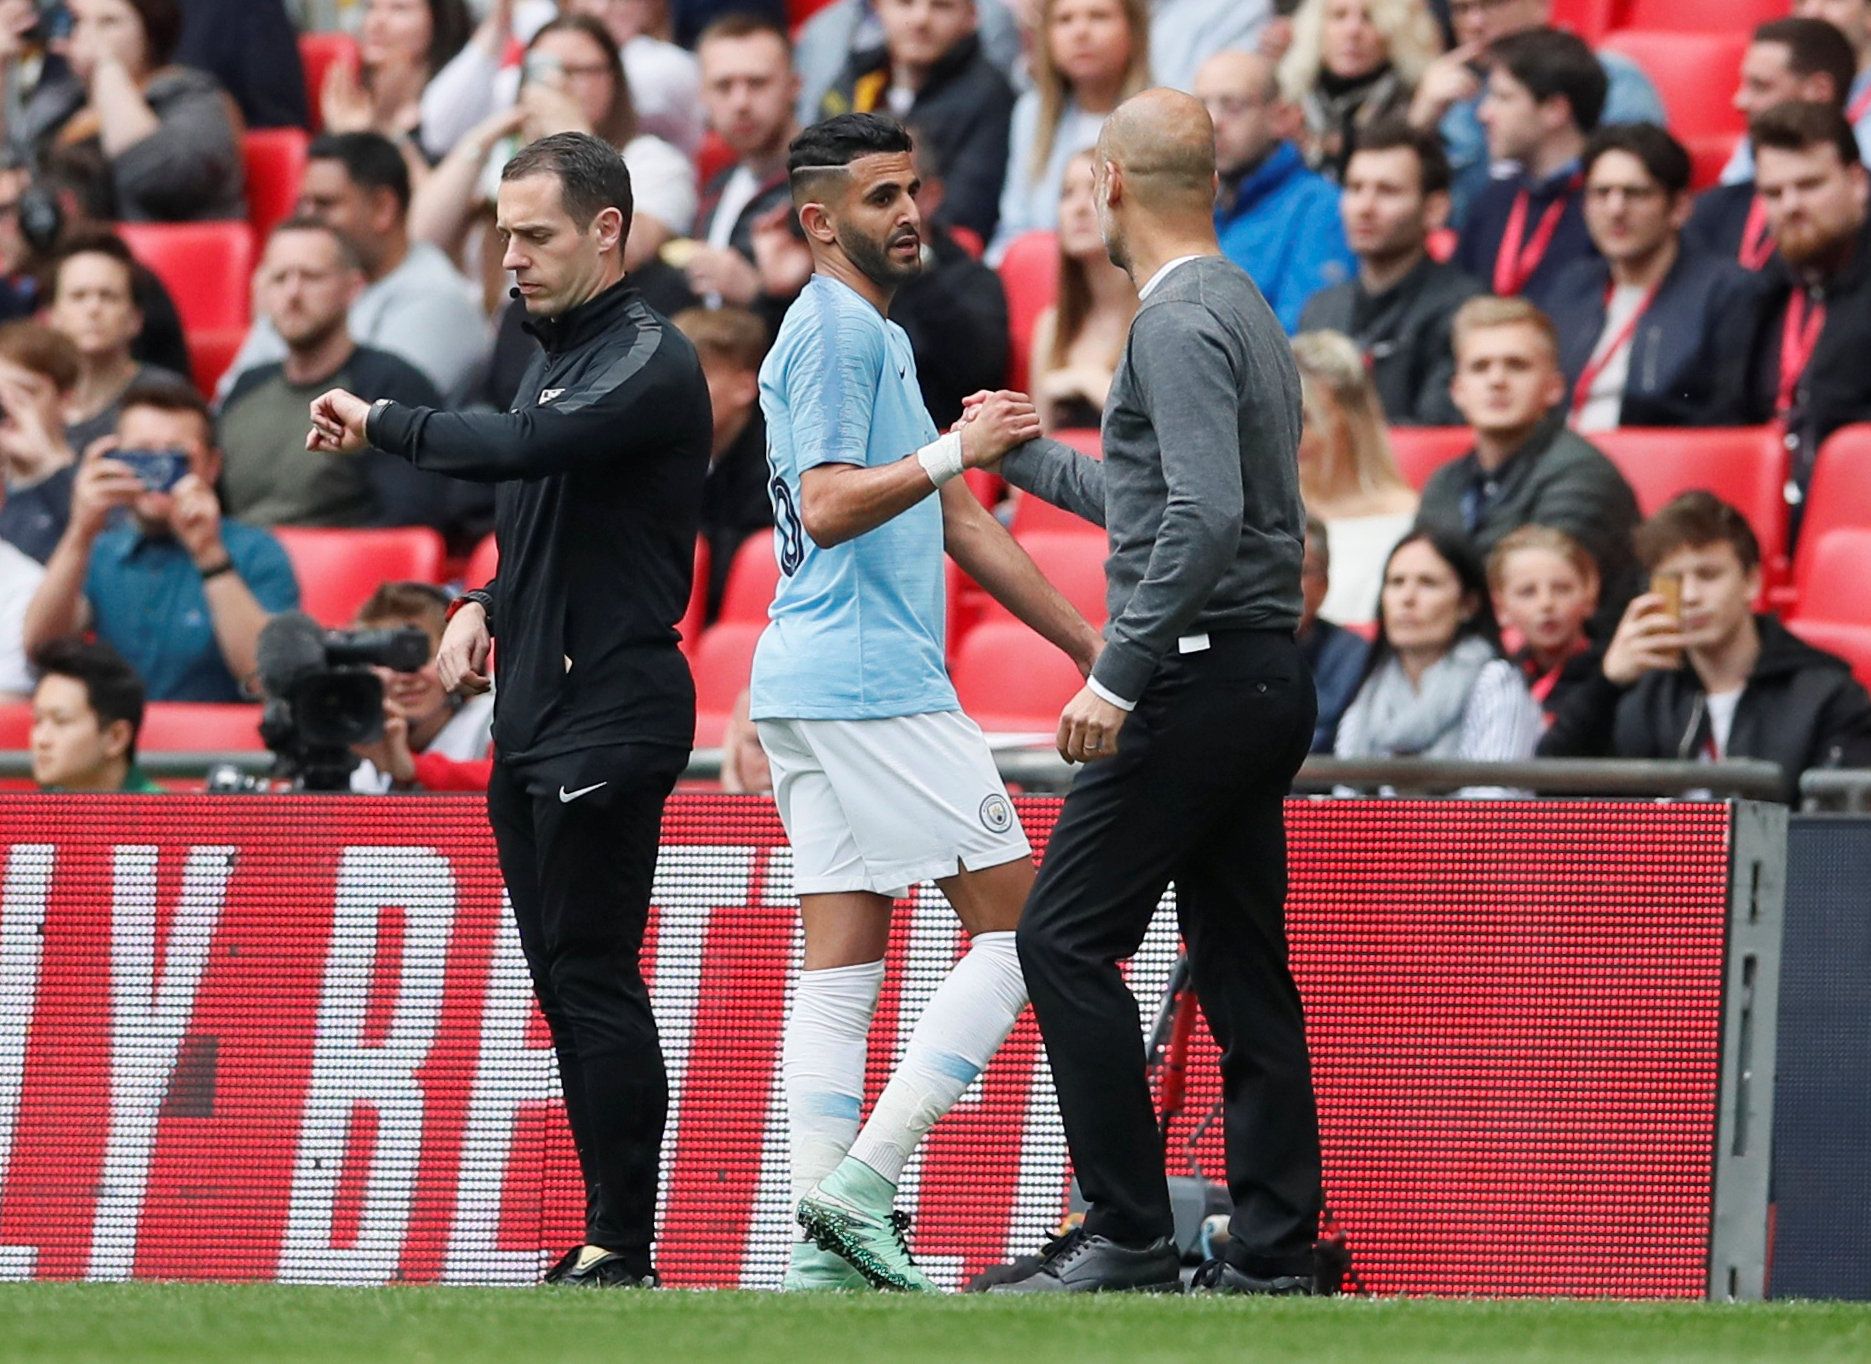 Soccer Football -  FA Cup Final - Manchester City v Watford - Wembley Stadium, London, Britain - May 18, 2019  Manchester City's Riyad Mahrez shakes hands with Manchester City manager Pep Guardiola as he is substituted off      REUTERS/David Klein